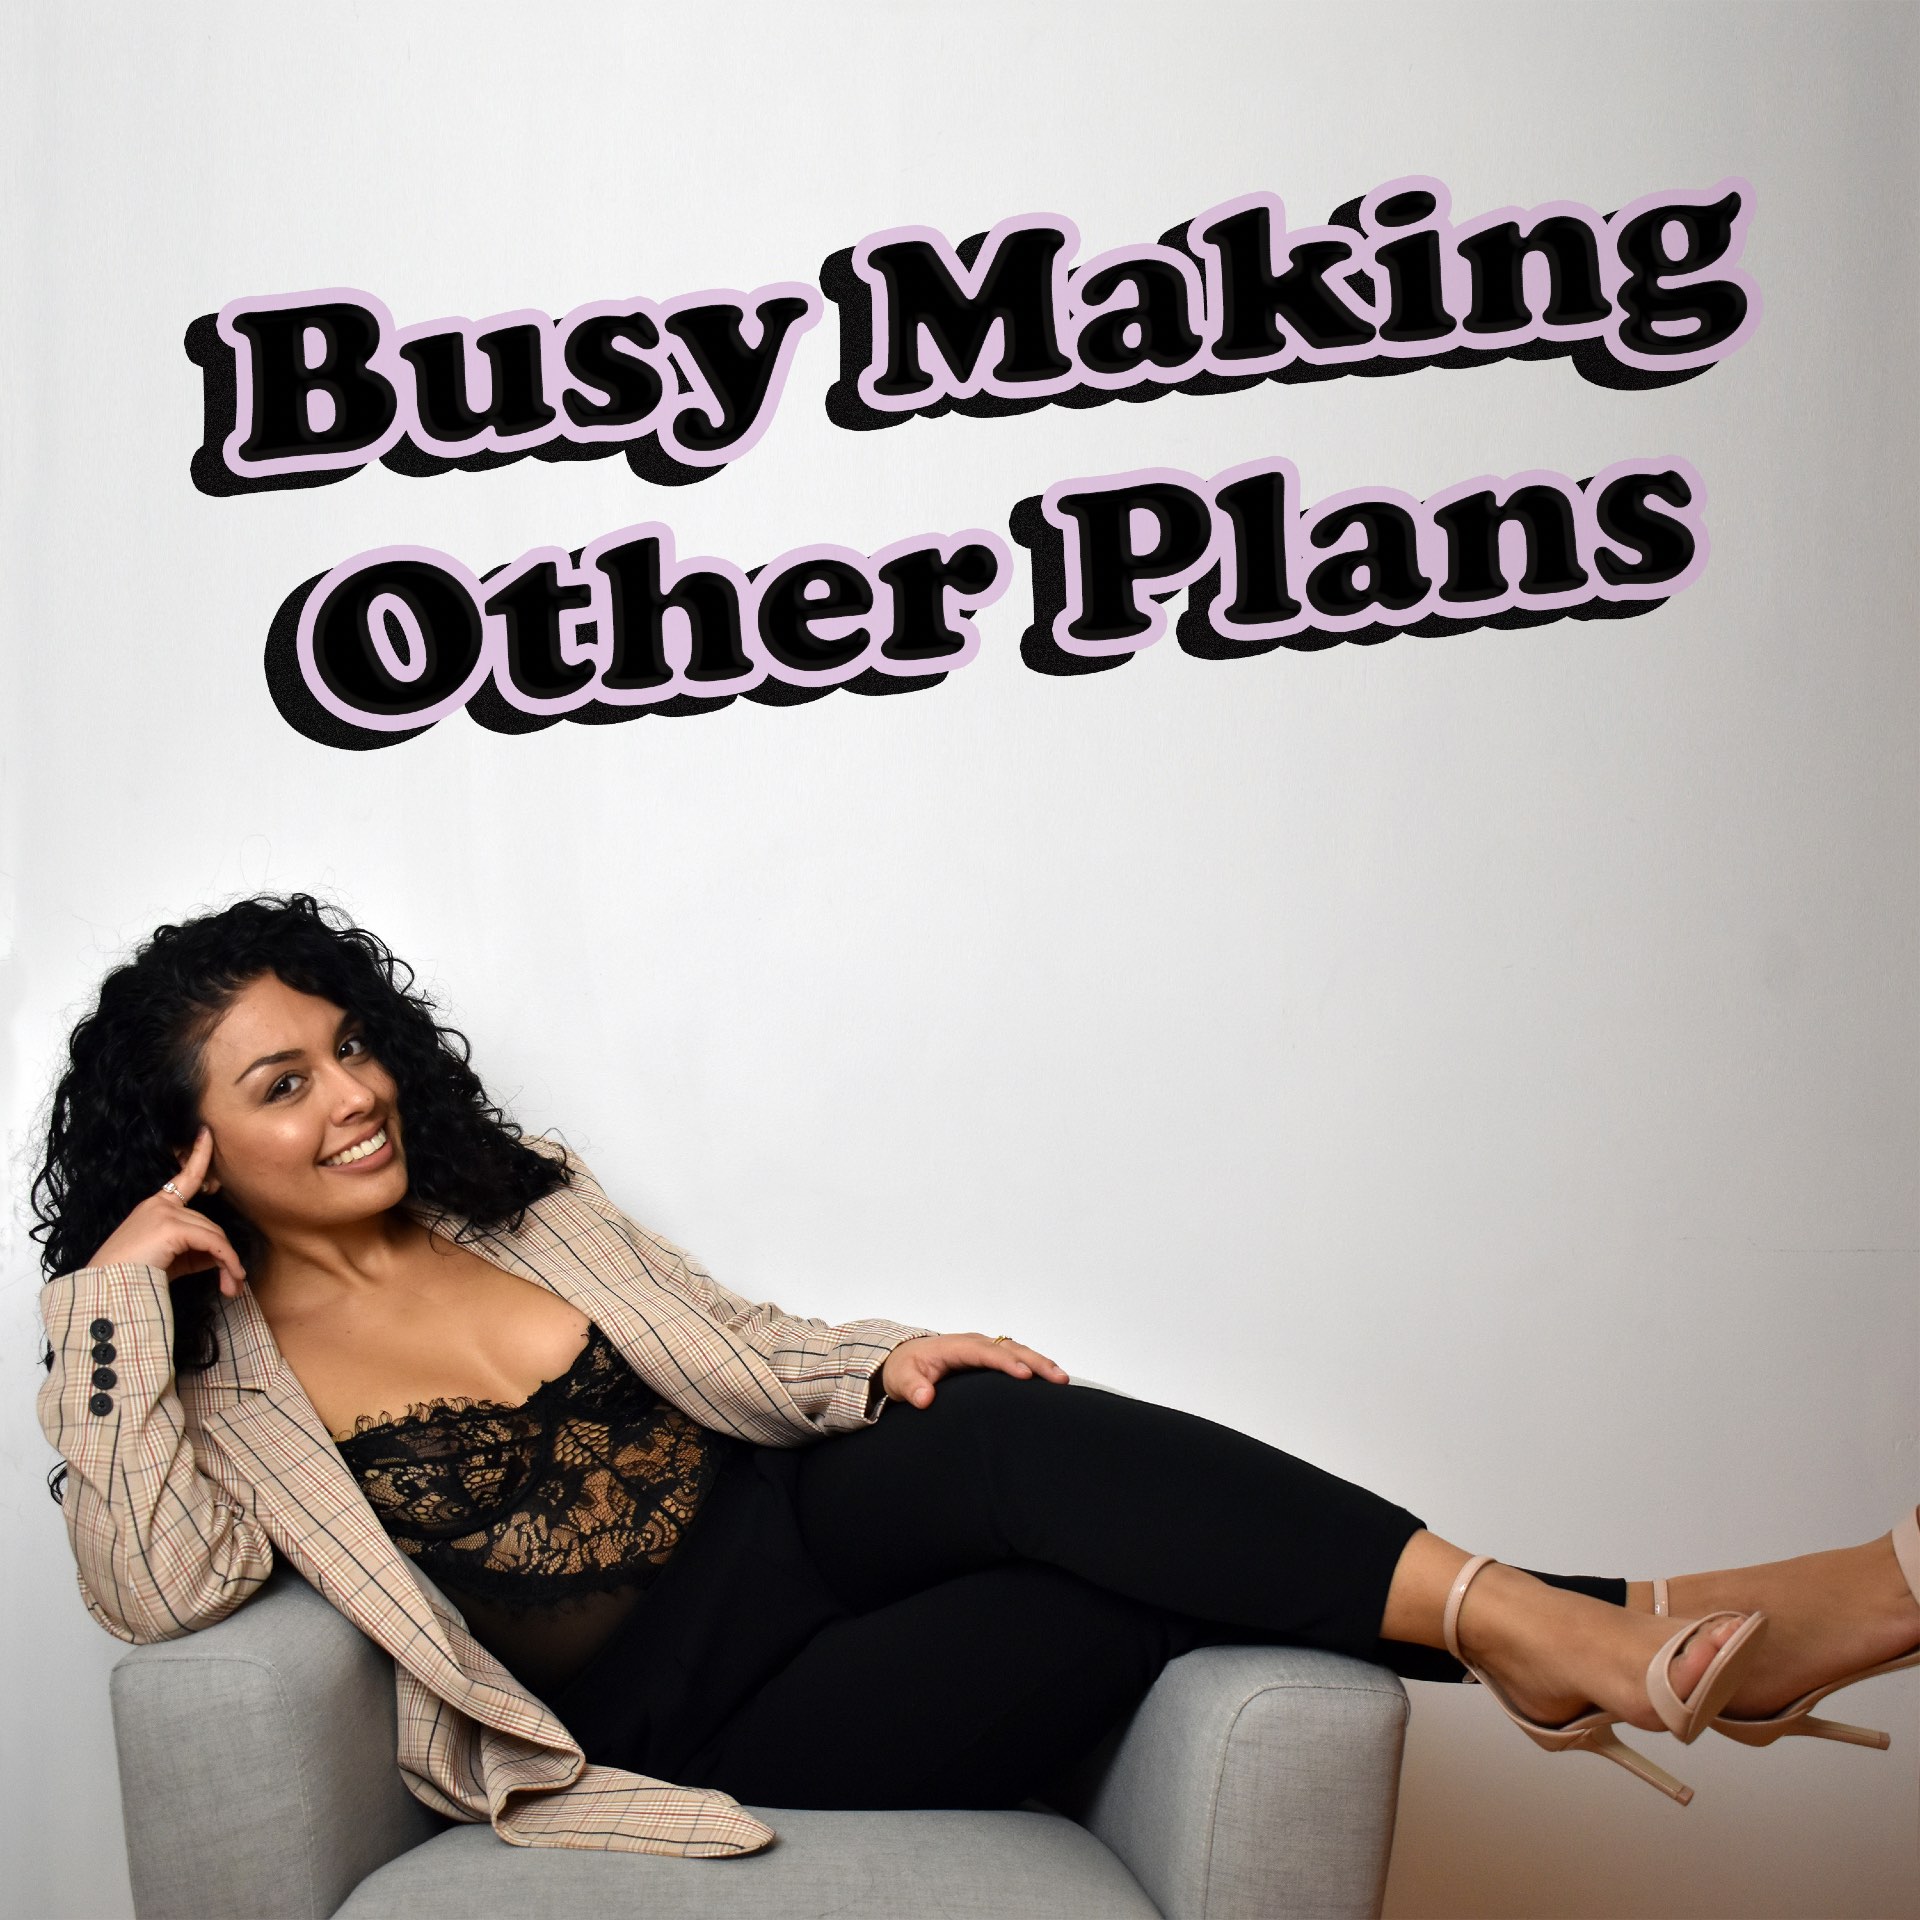 Busy Making Other Plans